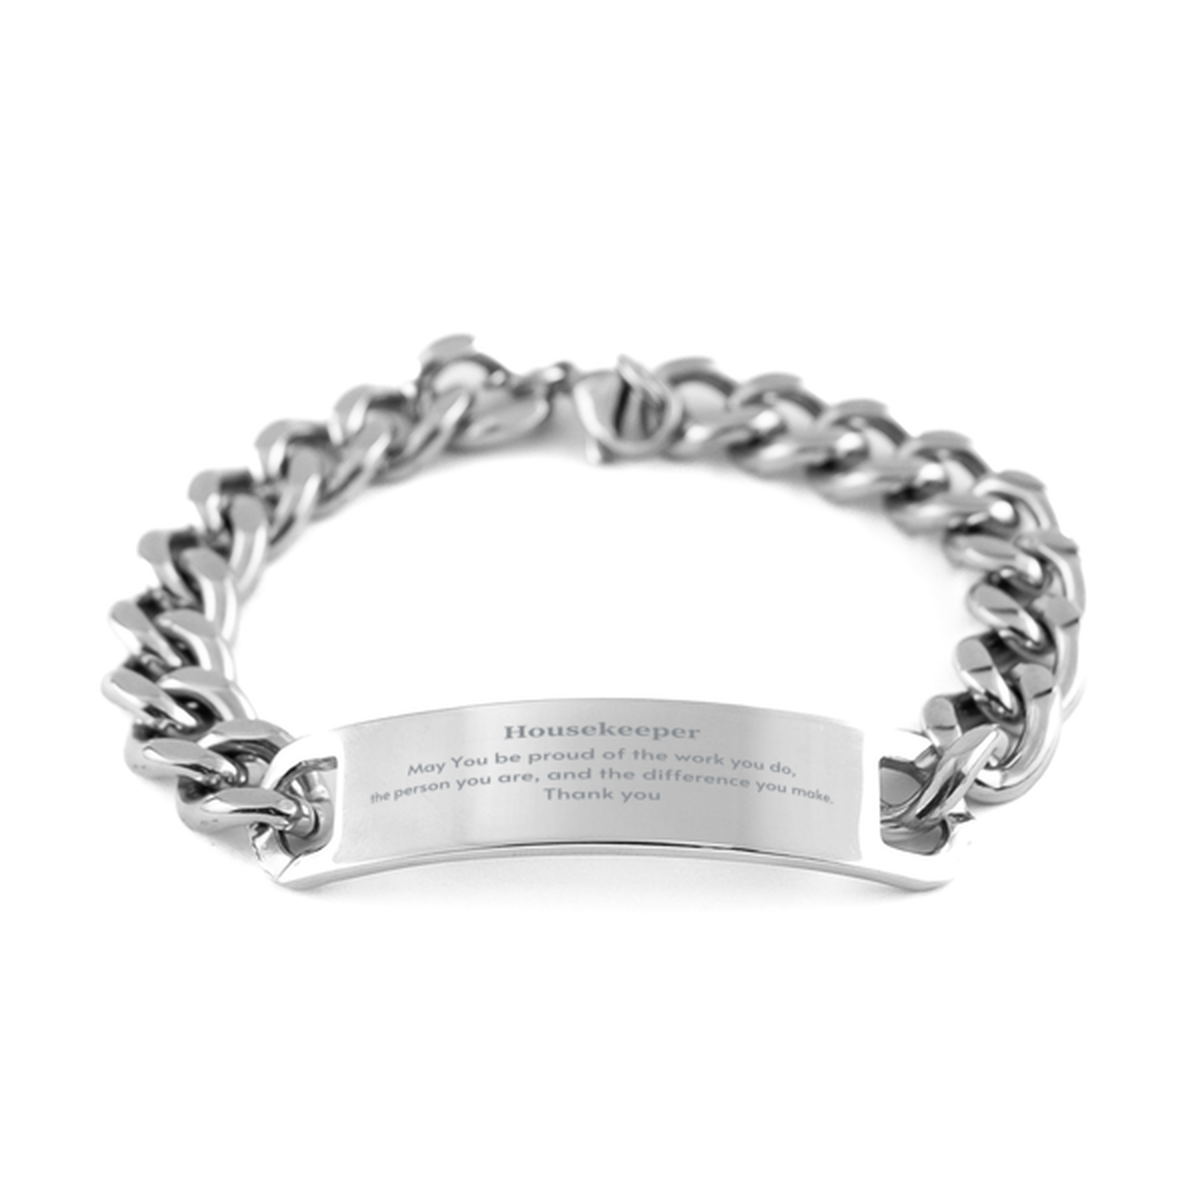 Heartwarming Cuban Chain Stainless Steel Bracelet Retirement Coworkers Gifts for Housekeeper, Housekeeper May You be proud of the work you do, the person you are Gifts for Boss Men Women Friends